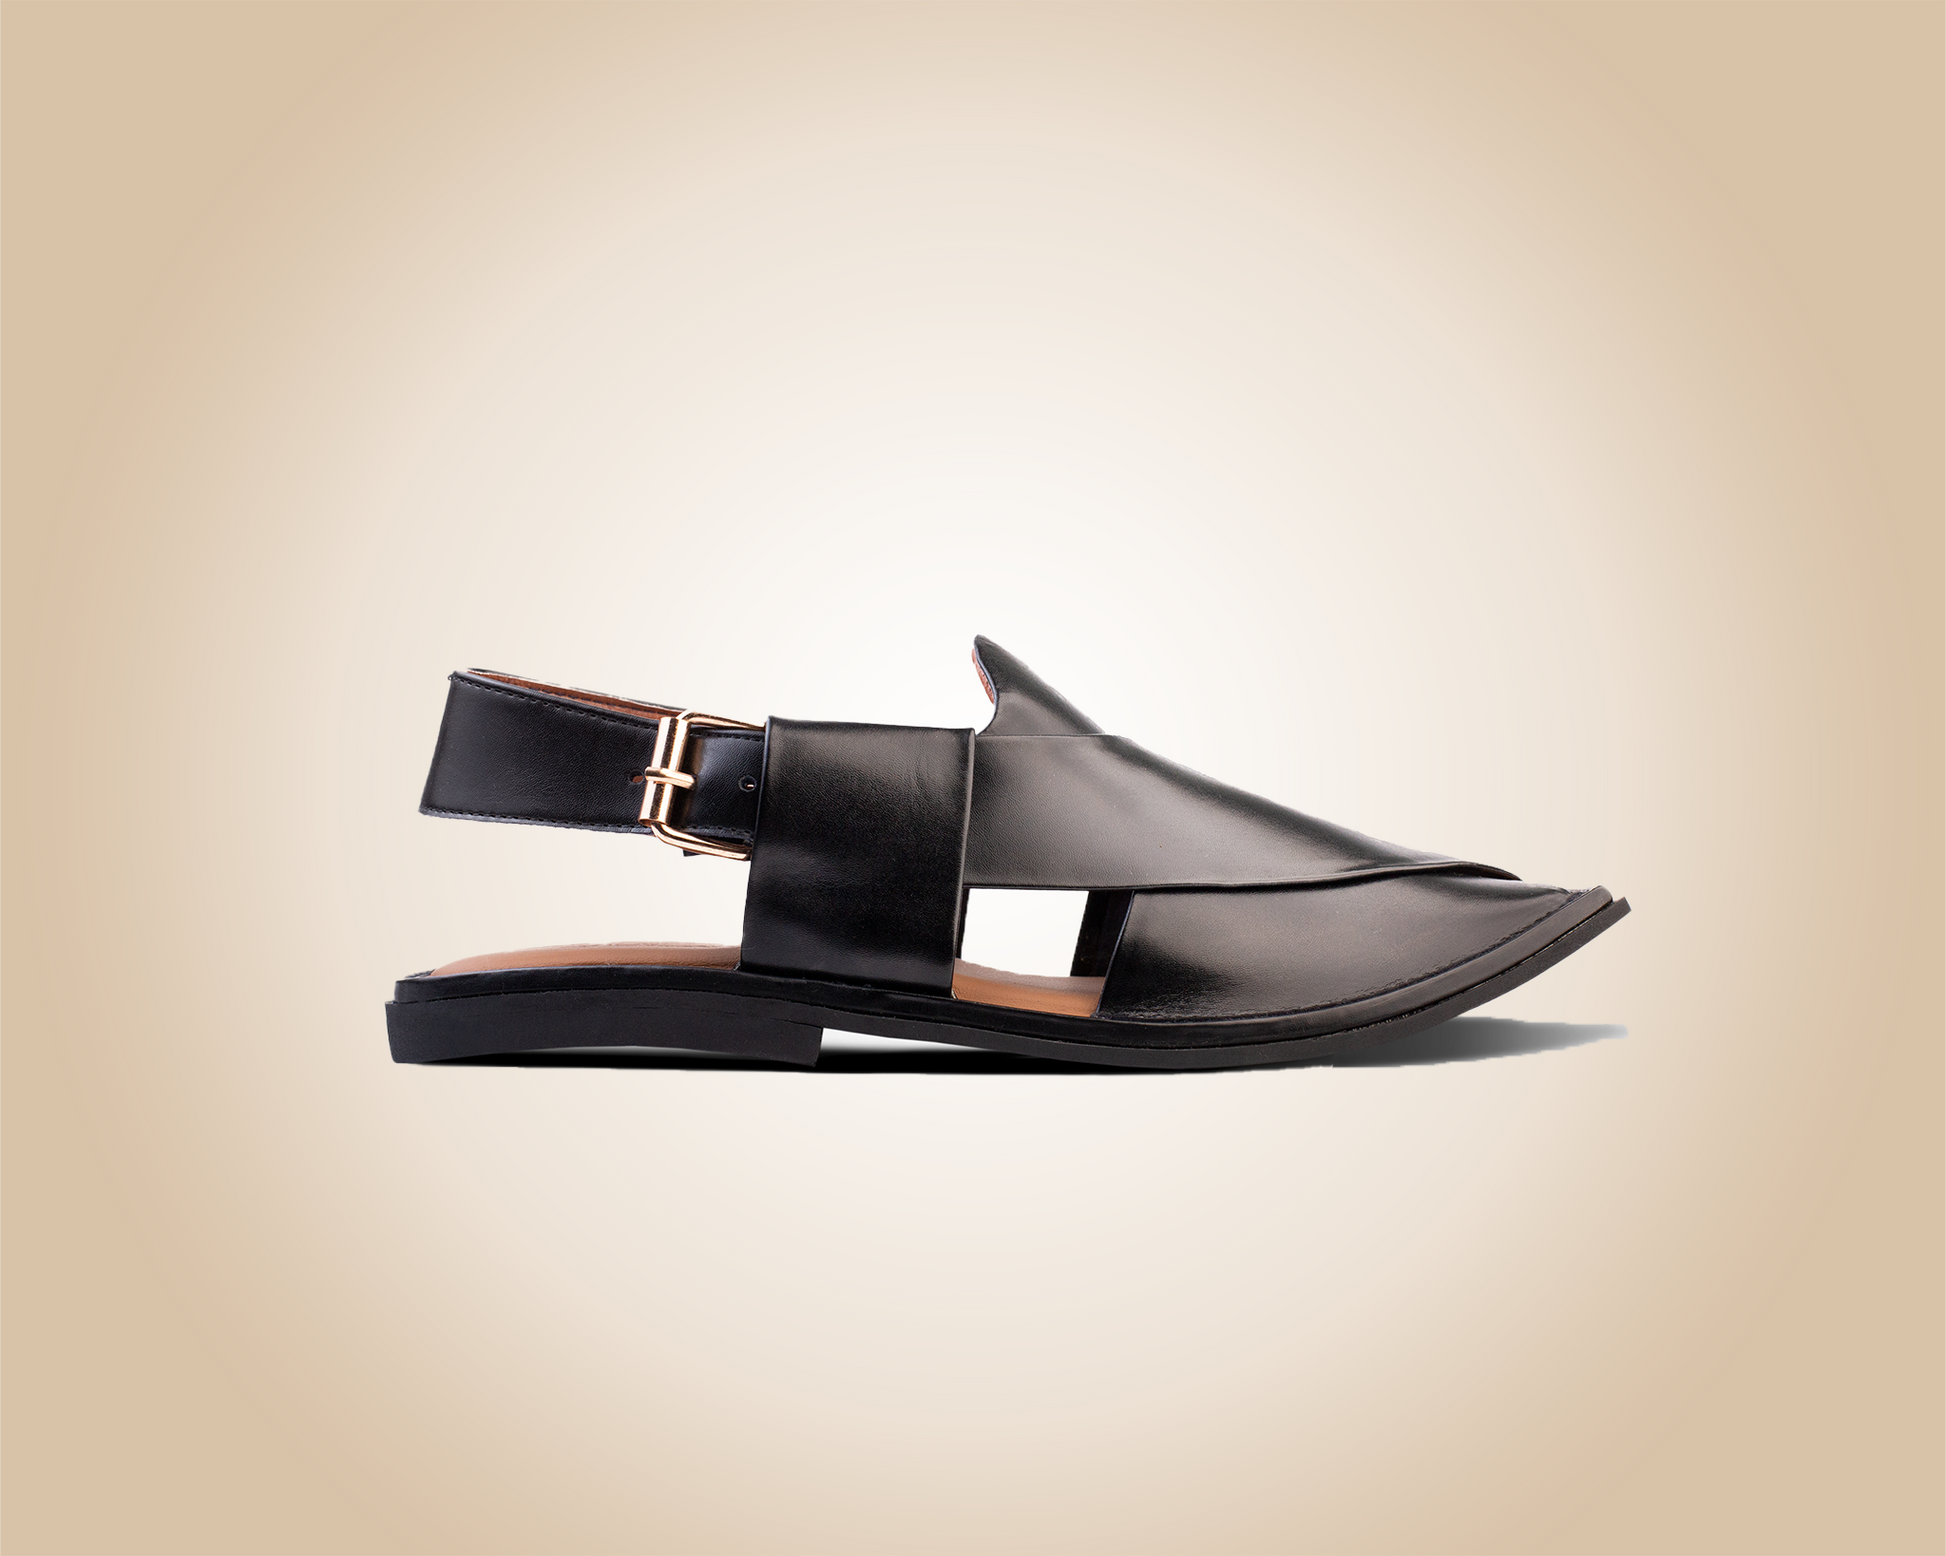 "Cut Jet Black Saplay sandals, known as Peshawari Chappal, featuring traditional leather craftsmanship."